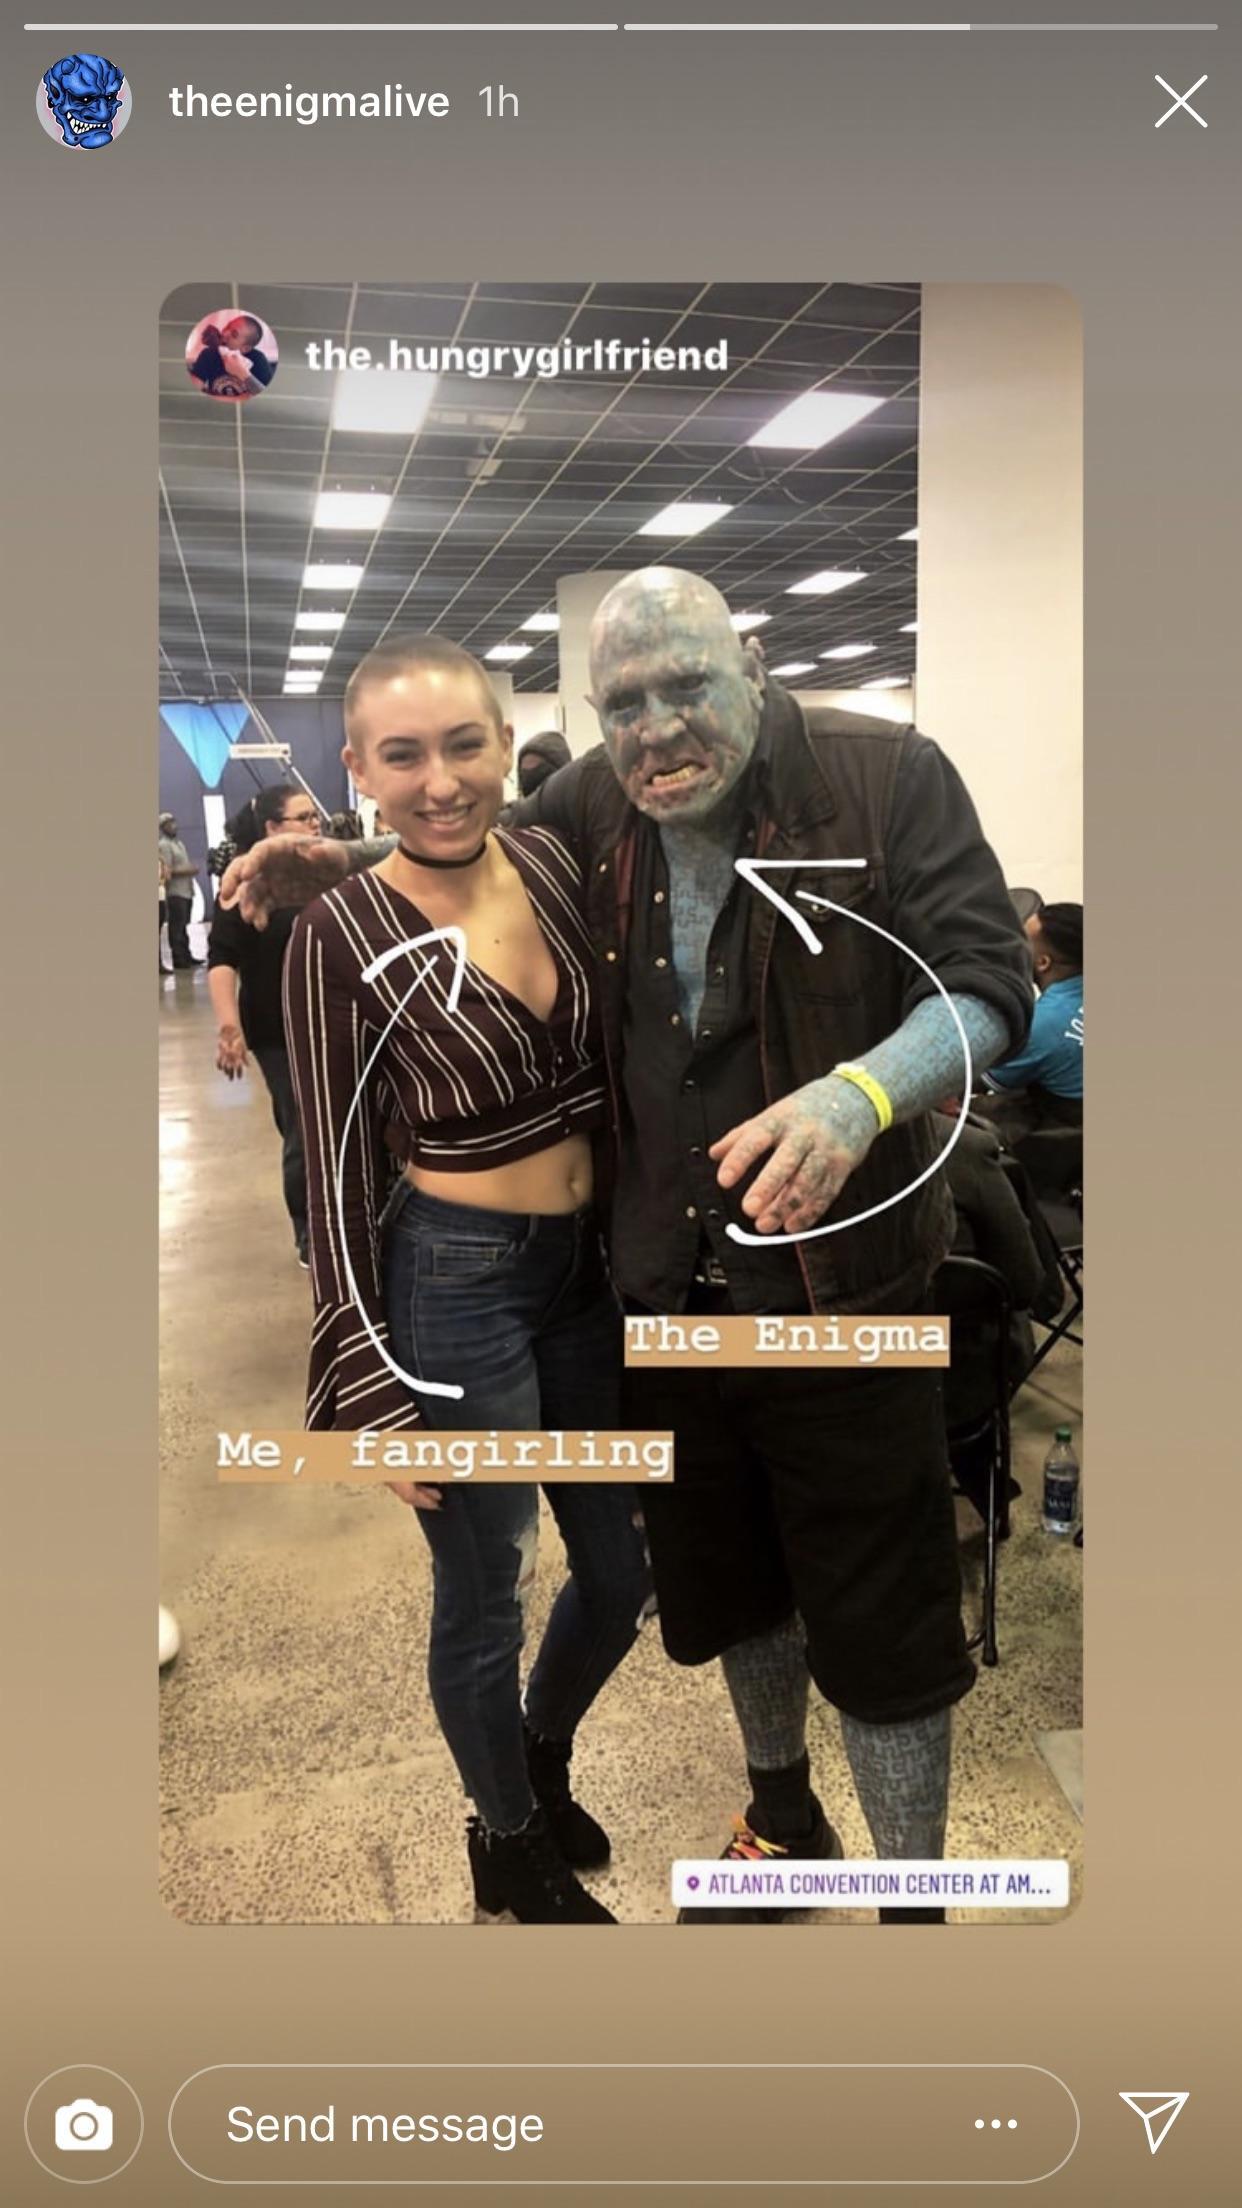 hover hand poster - theenigmalive 1h the hungrygirlfriend The Enigma Me, fangirling O Atlanta Convention Center At Am... Send message